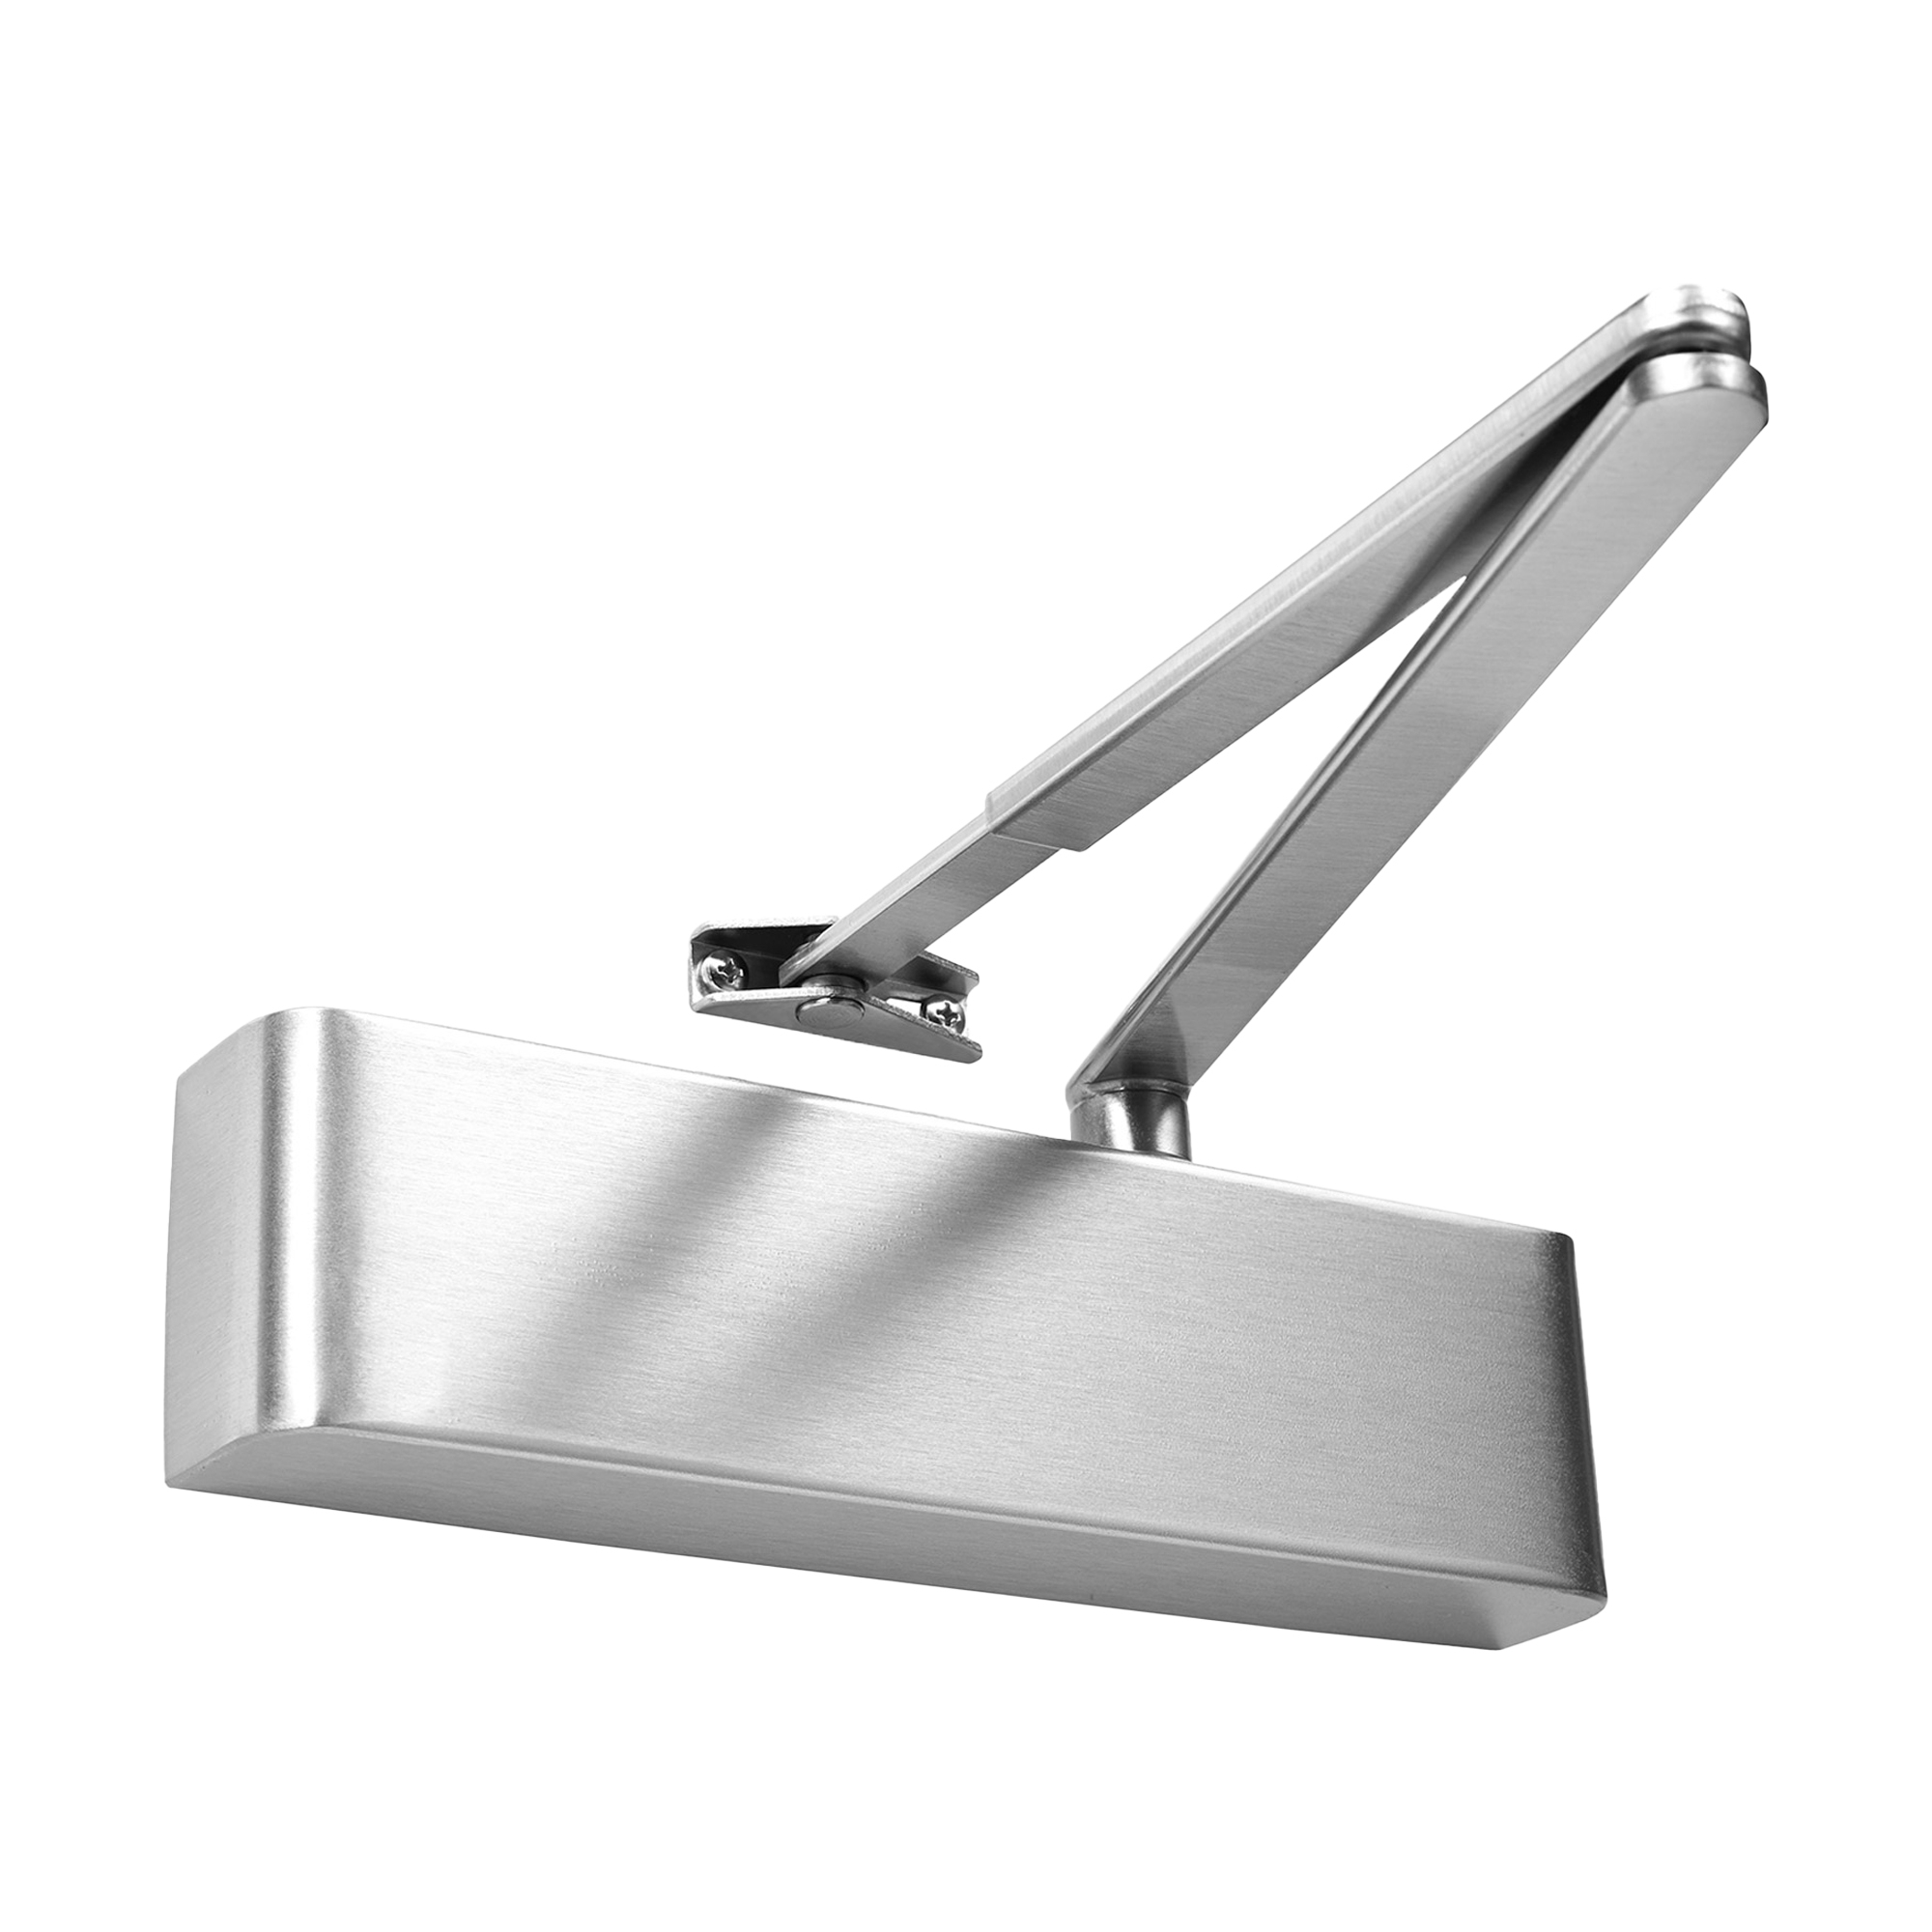 Door Closer 2-6 H.O Pull Side + Cover